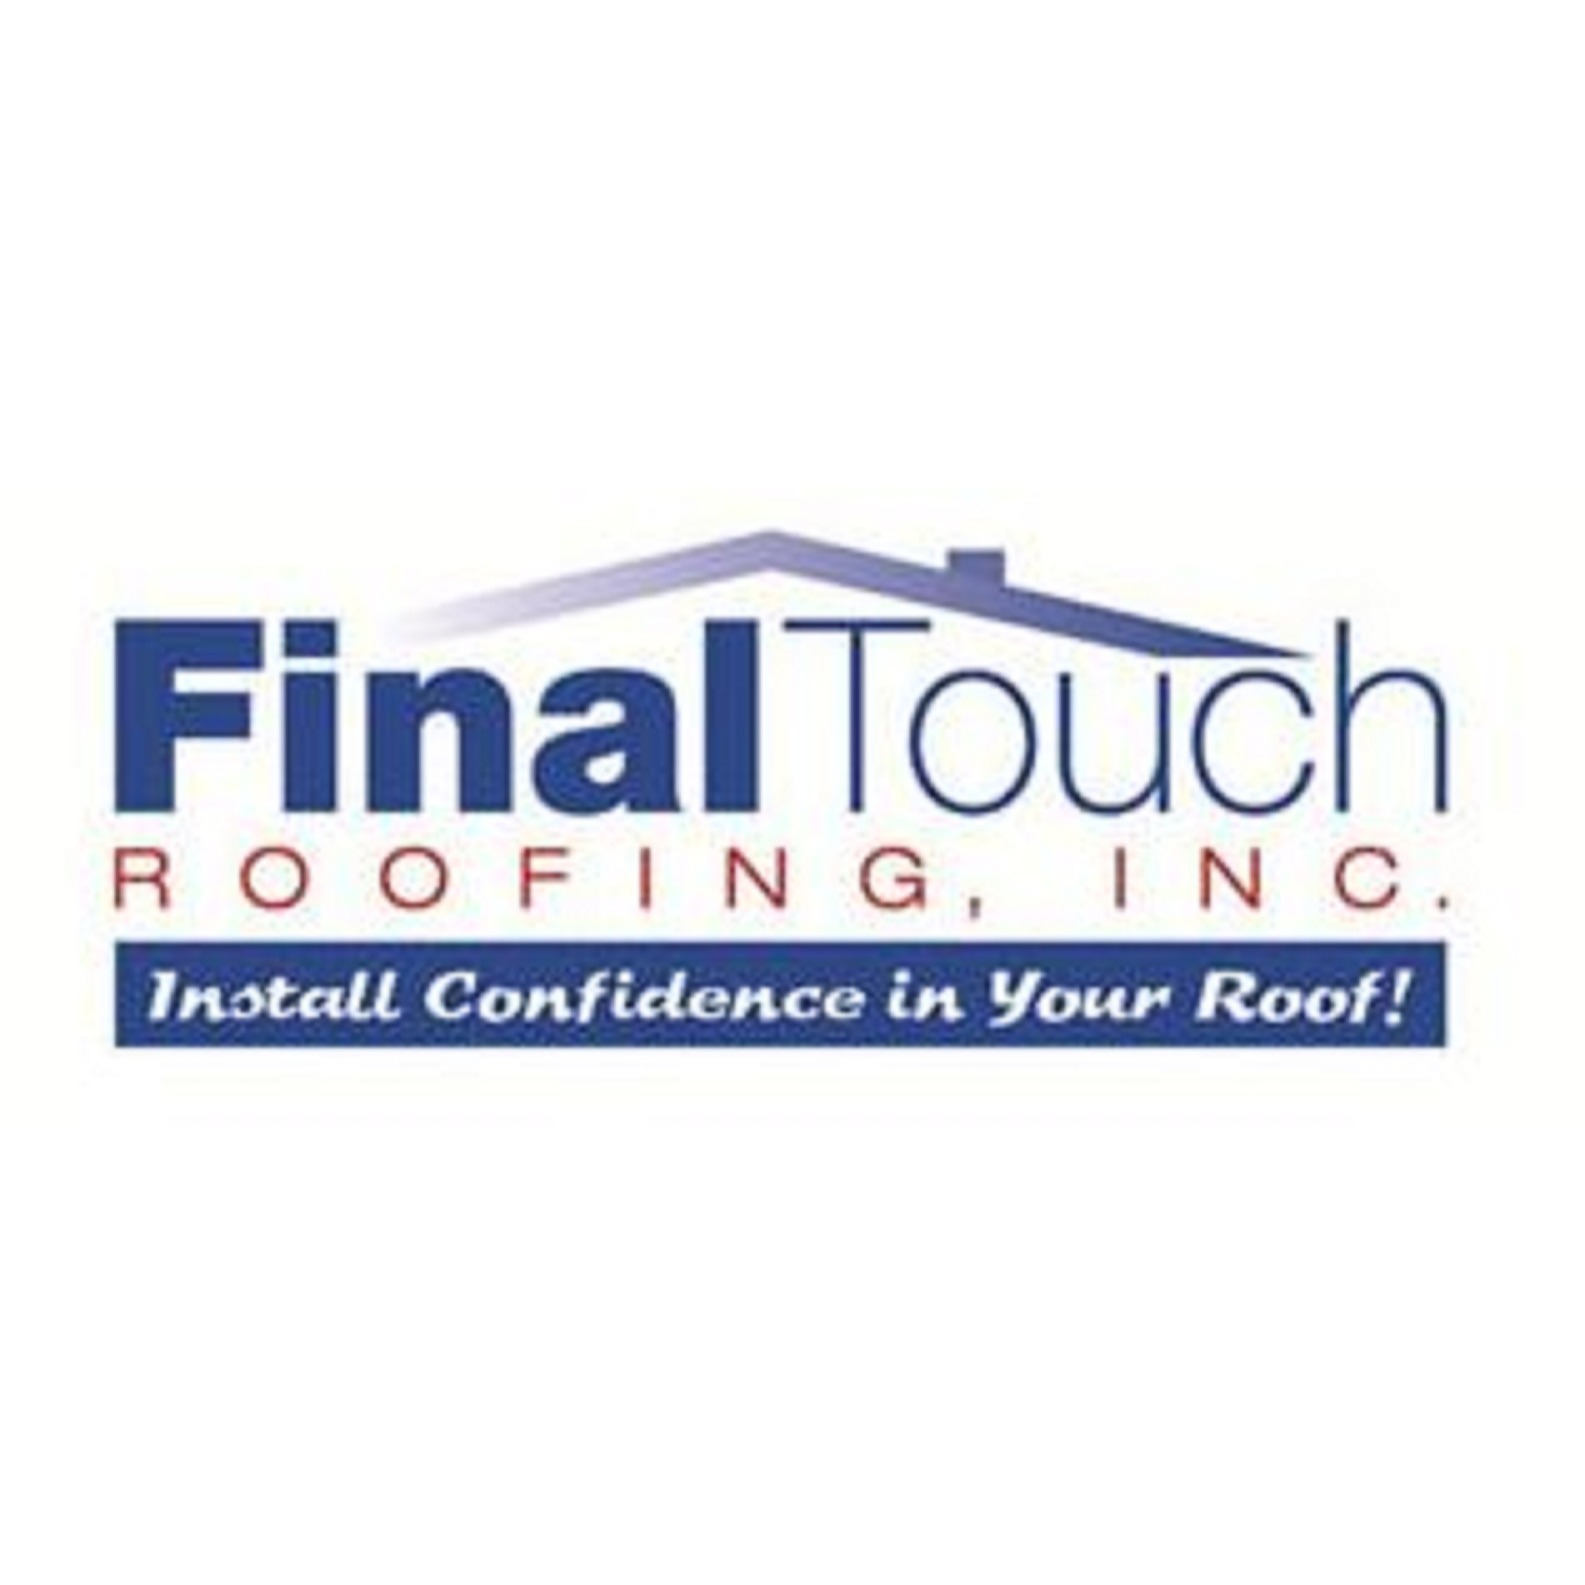 Final Touch Roofing, Inc - Hot Springs, AR 71901 - (501)525-4200 | ShowMeLocal.com